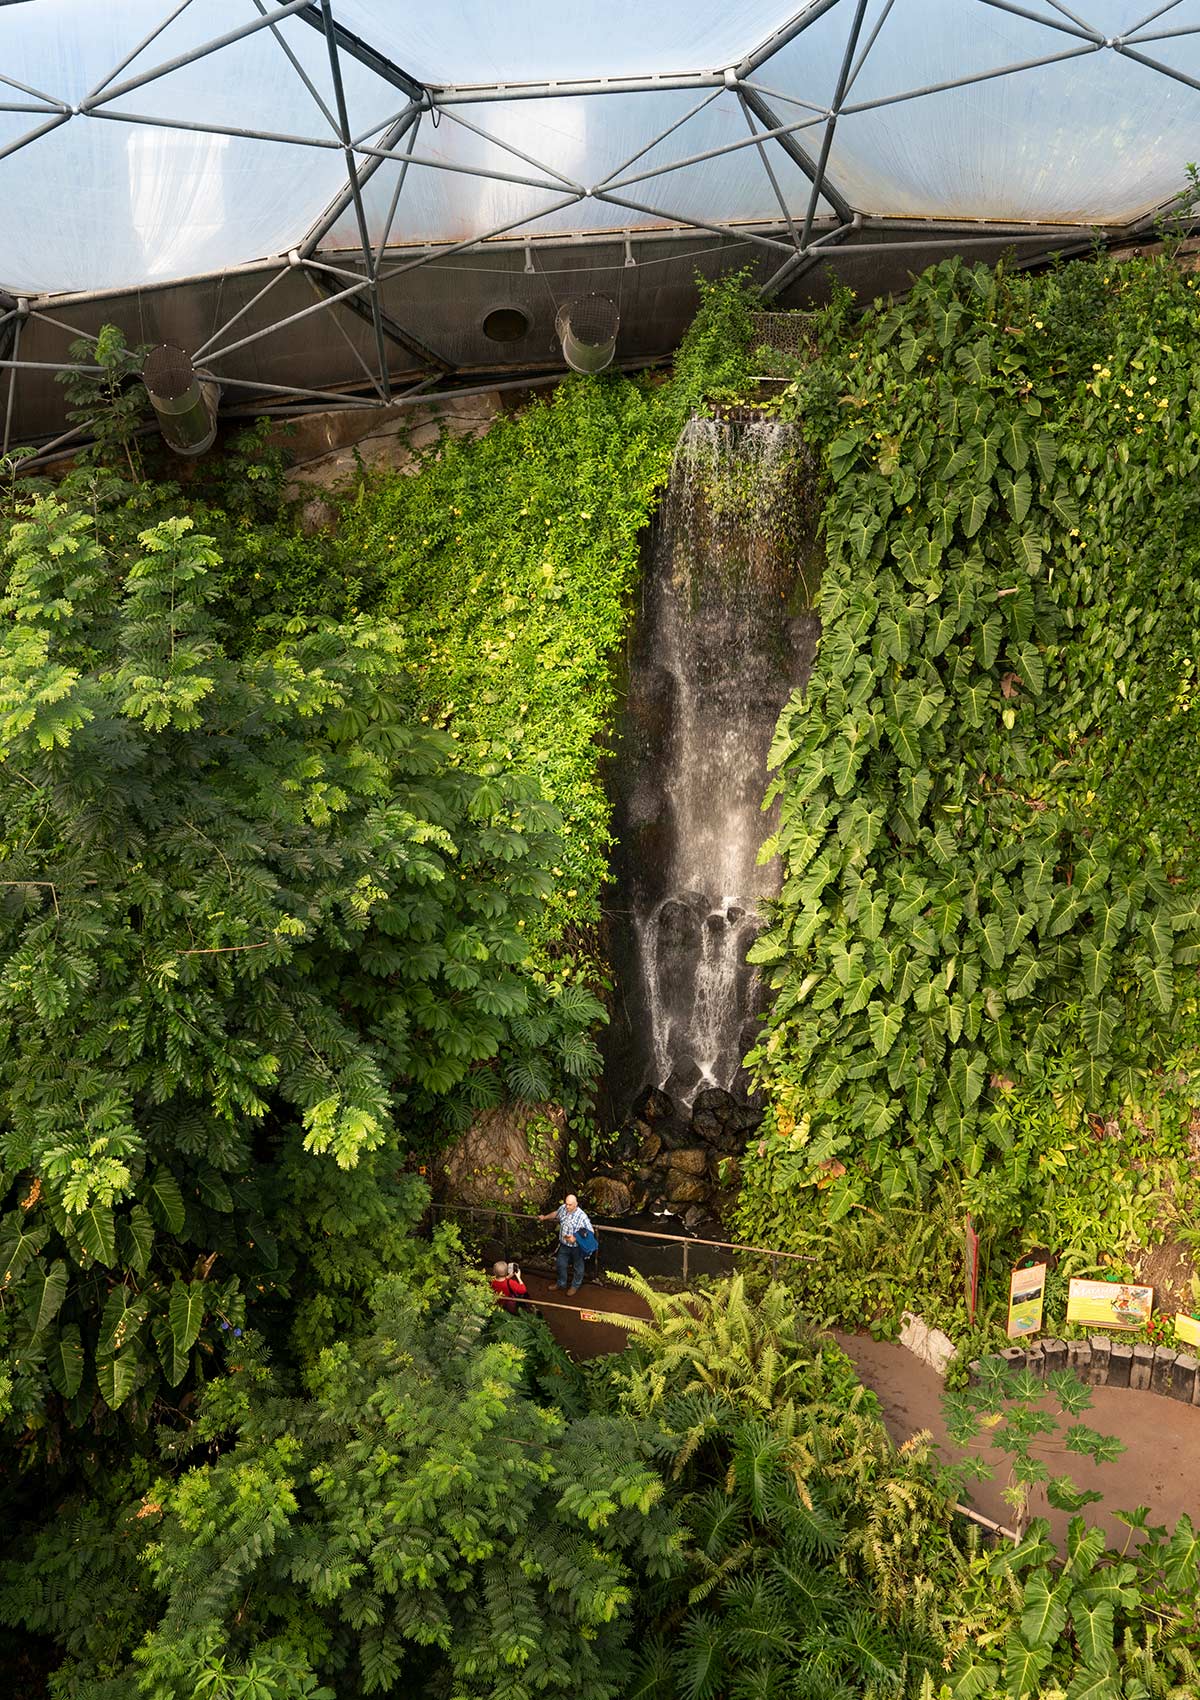 Chute, Biome forêt tropicale, Projet Eden, Cornouailles, Angleterre, Royaume-Uni / Waterfall, Rainforest Biome, Eden Project, Cornwall, England, UK